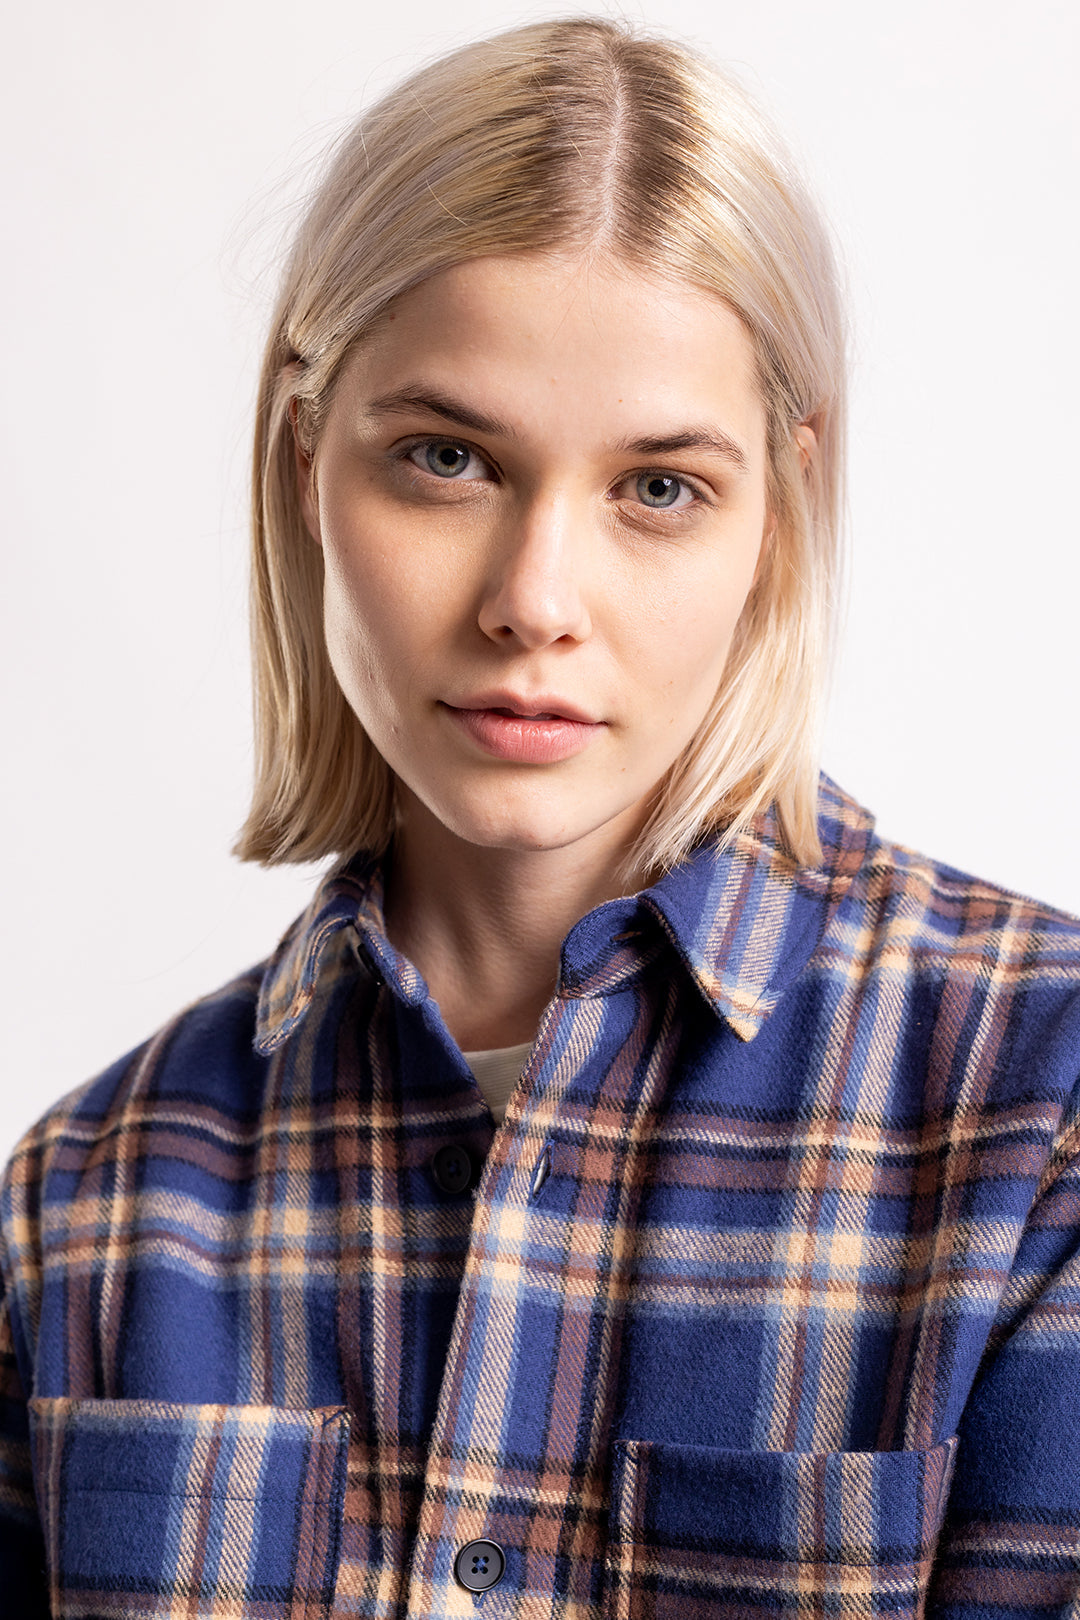 Checked flannel overshirt blue